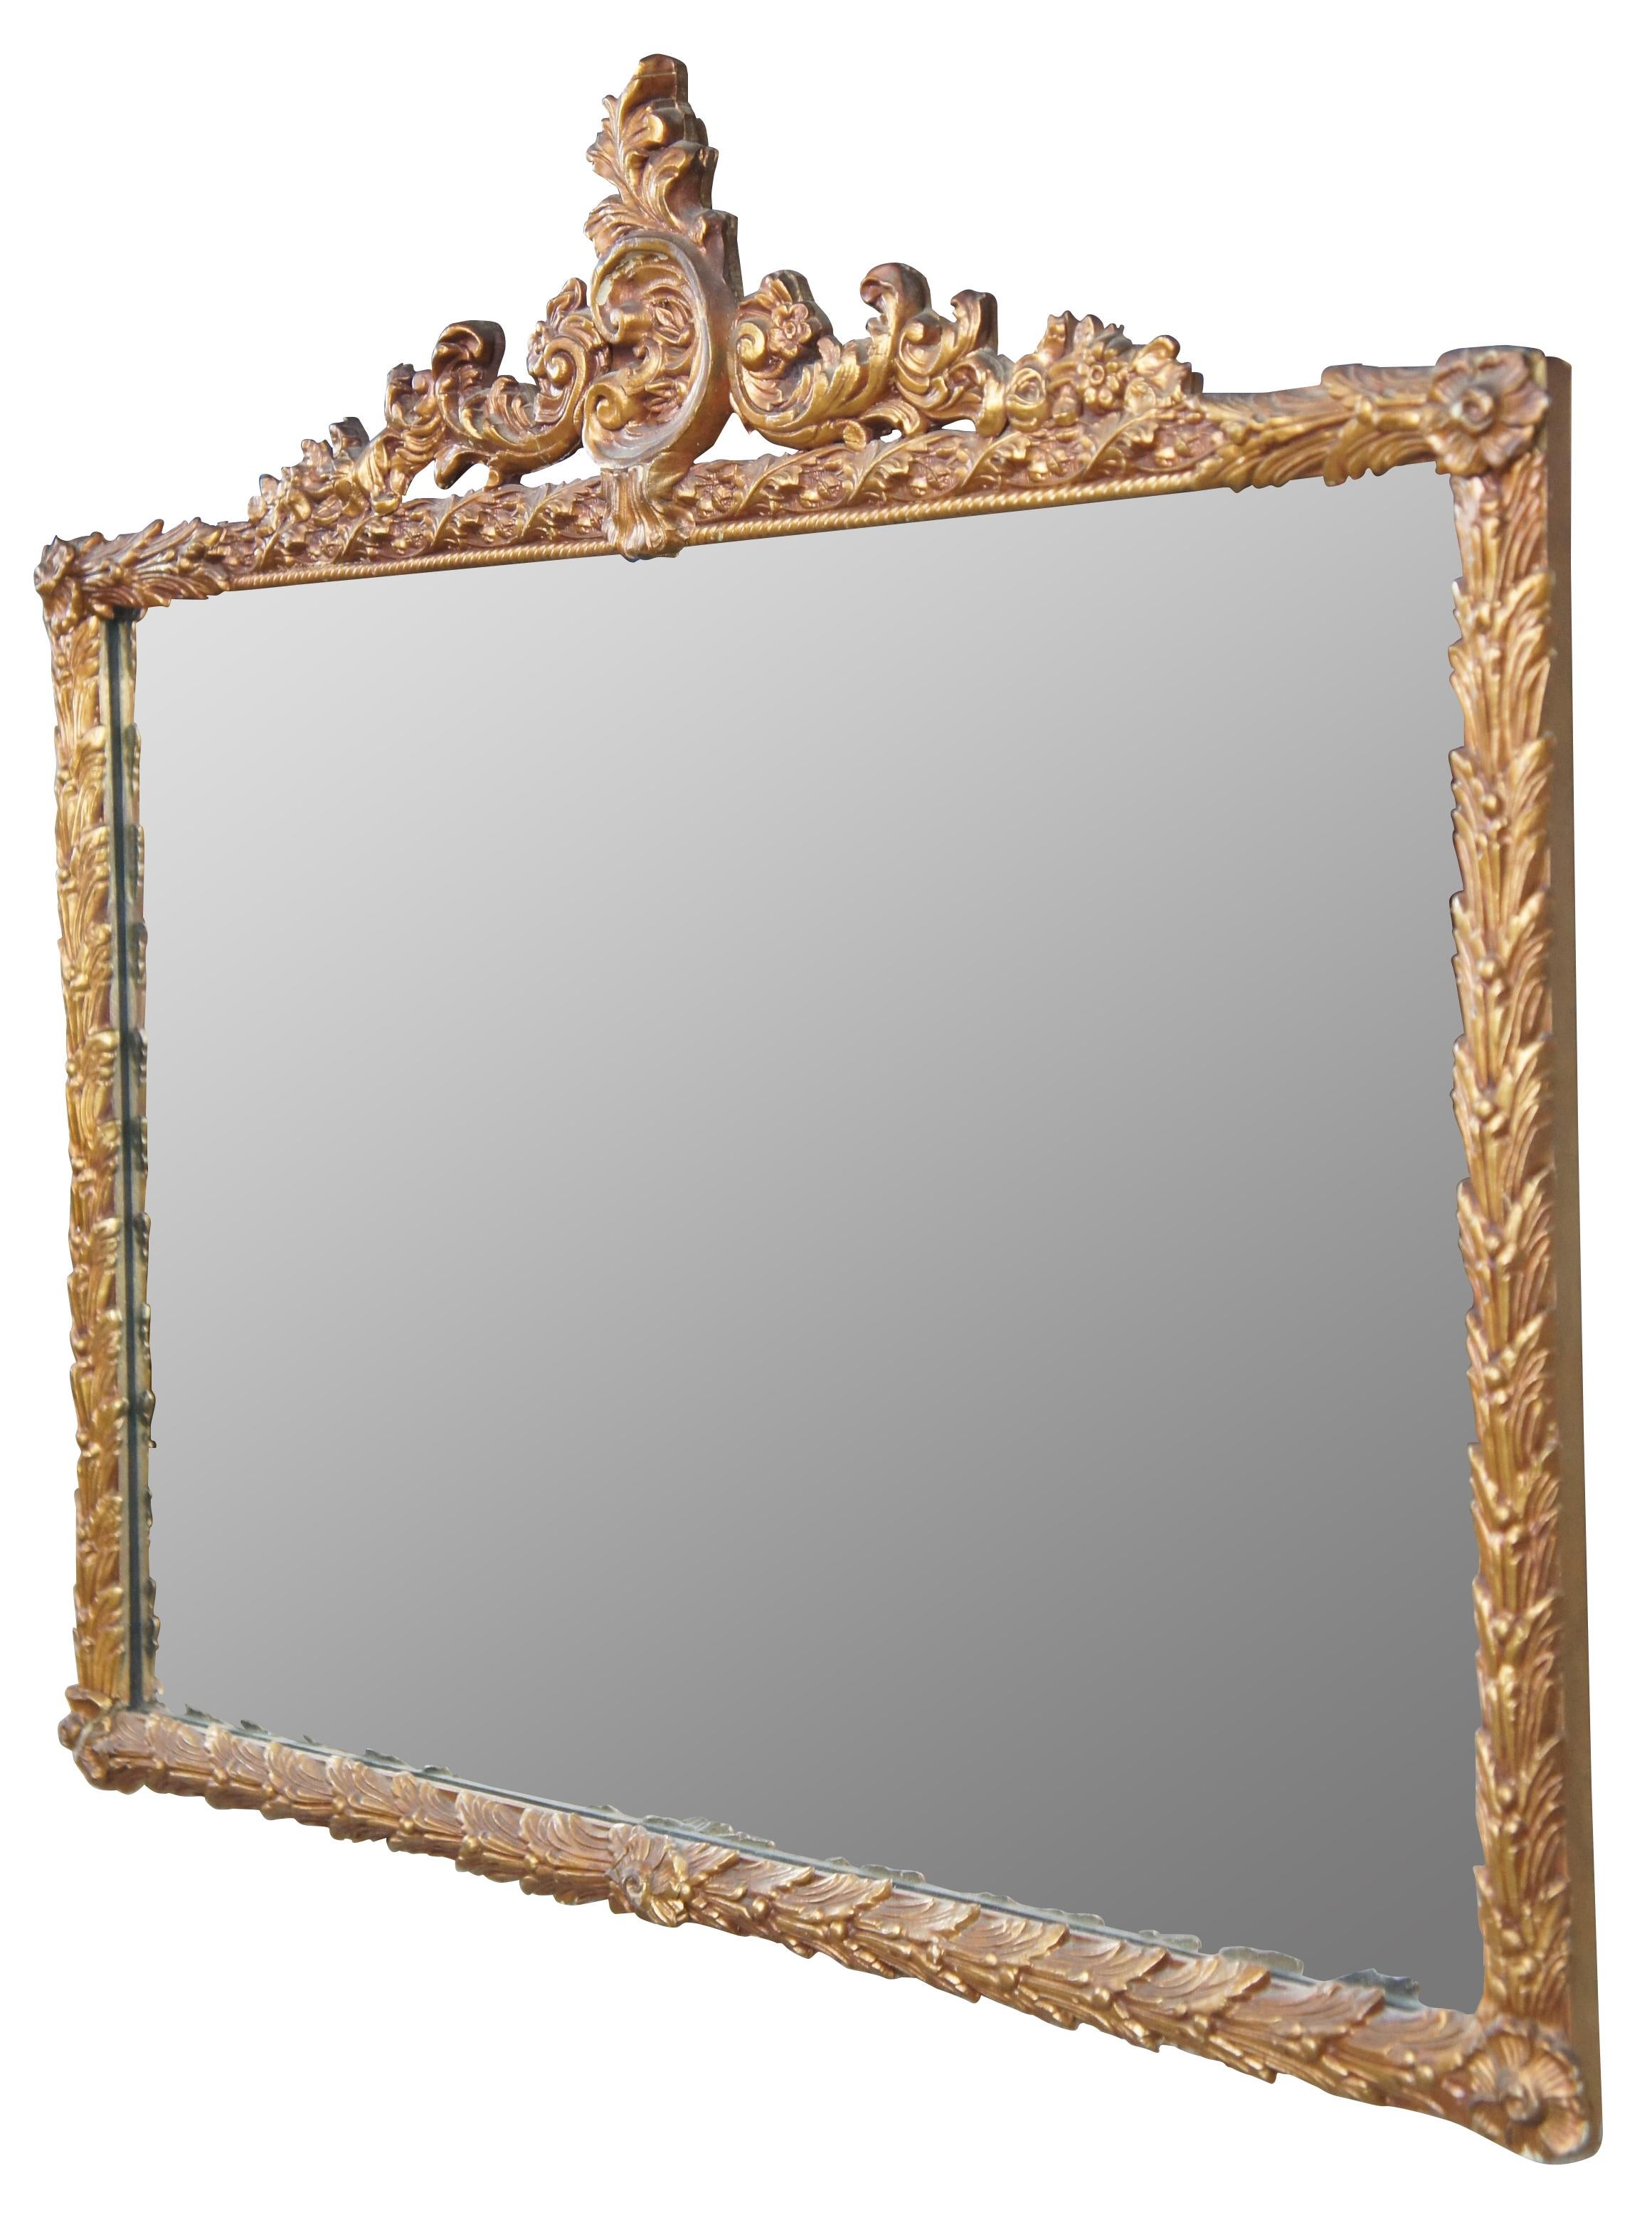 Antique French Louis XV Rococo mirror. Features ornate gold gilt frame with florals and scalloping. Measure: 35